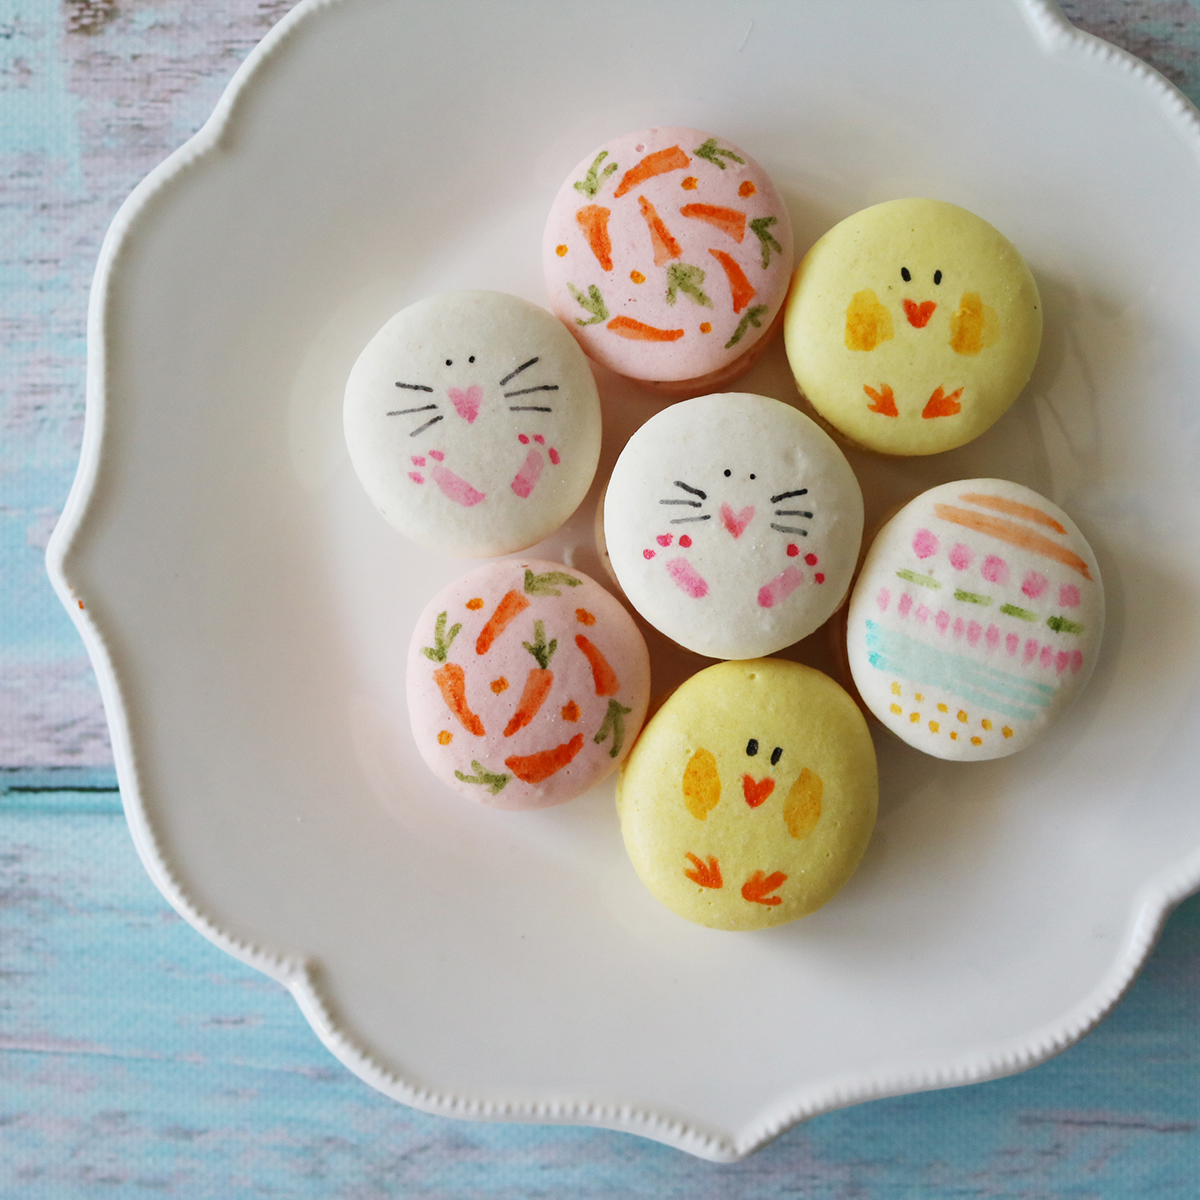 diy sweet ideas for entertaining and favors - painted macarons  | Lorrie Everitt Studio